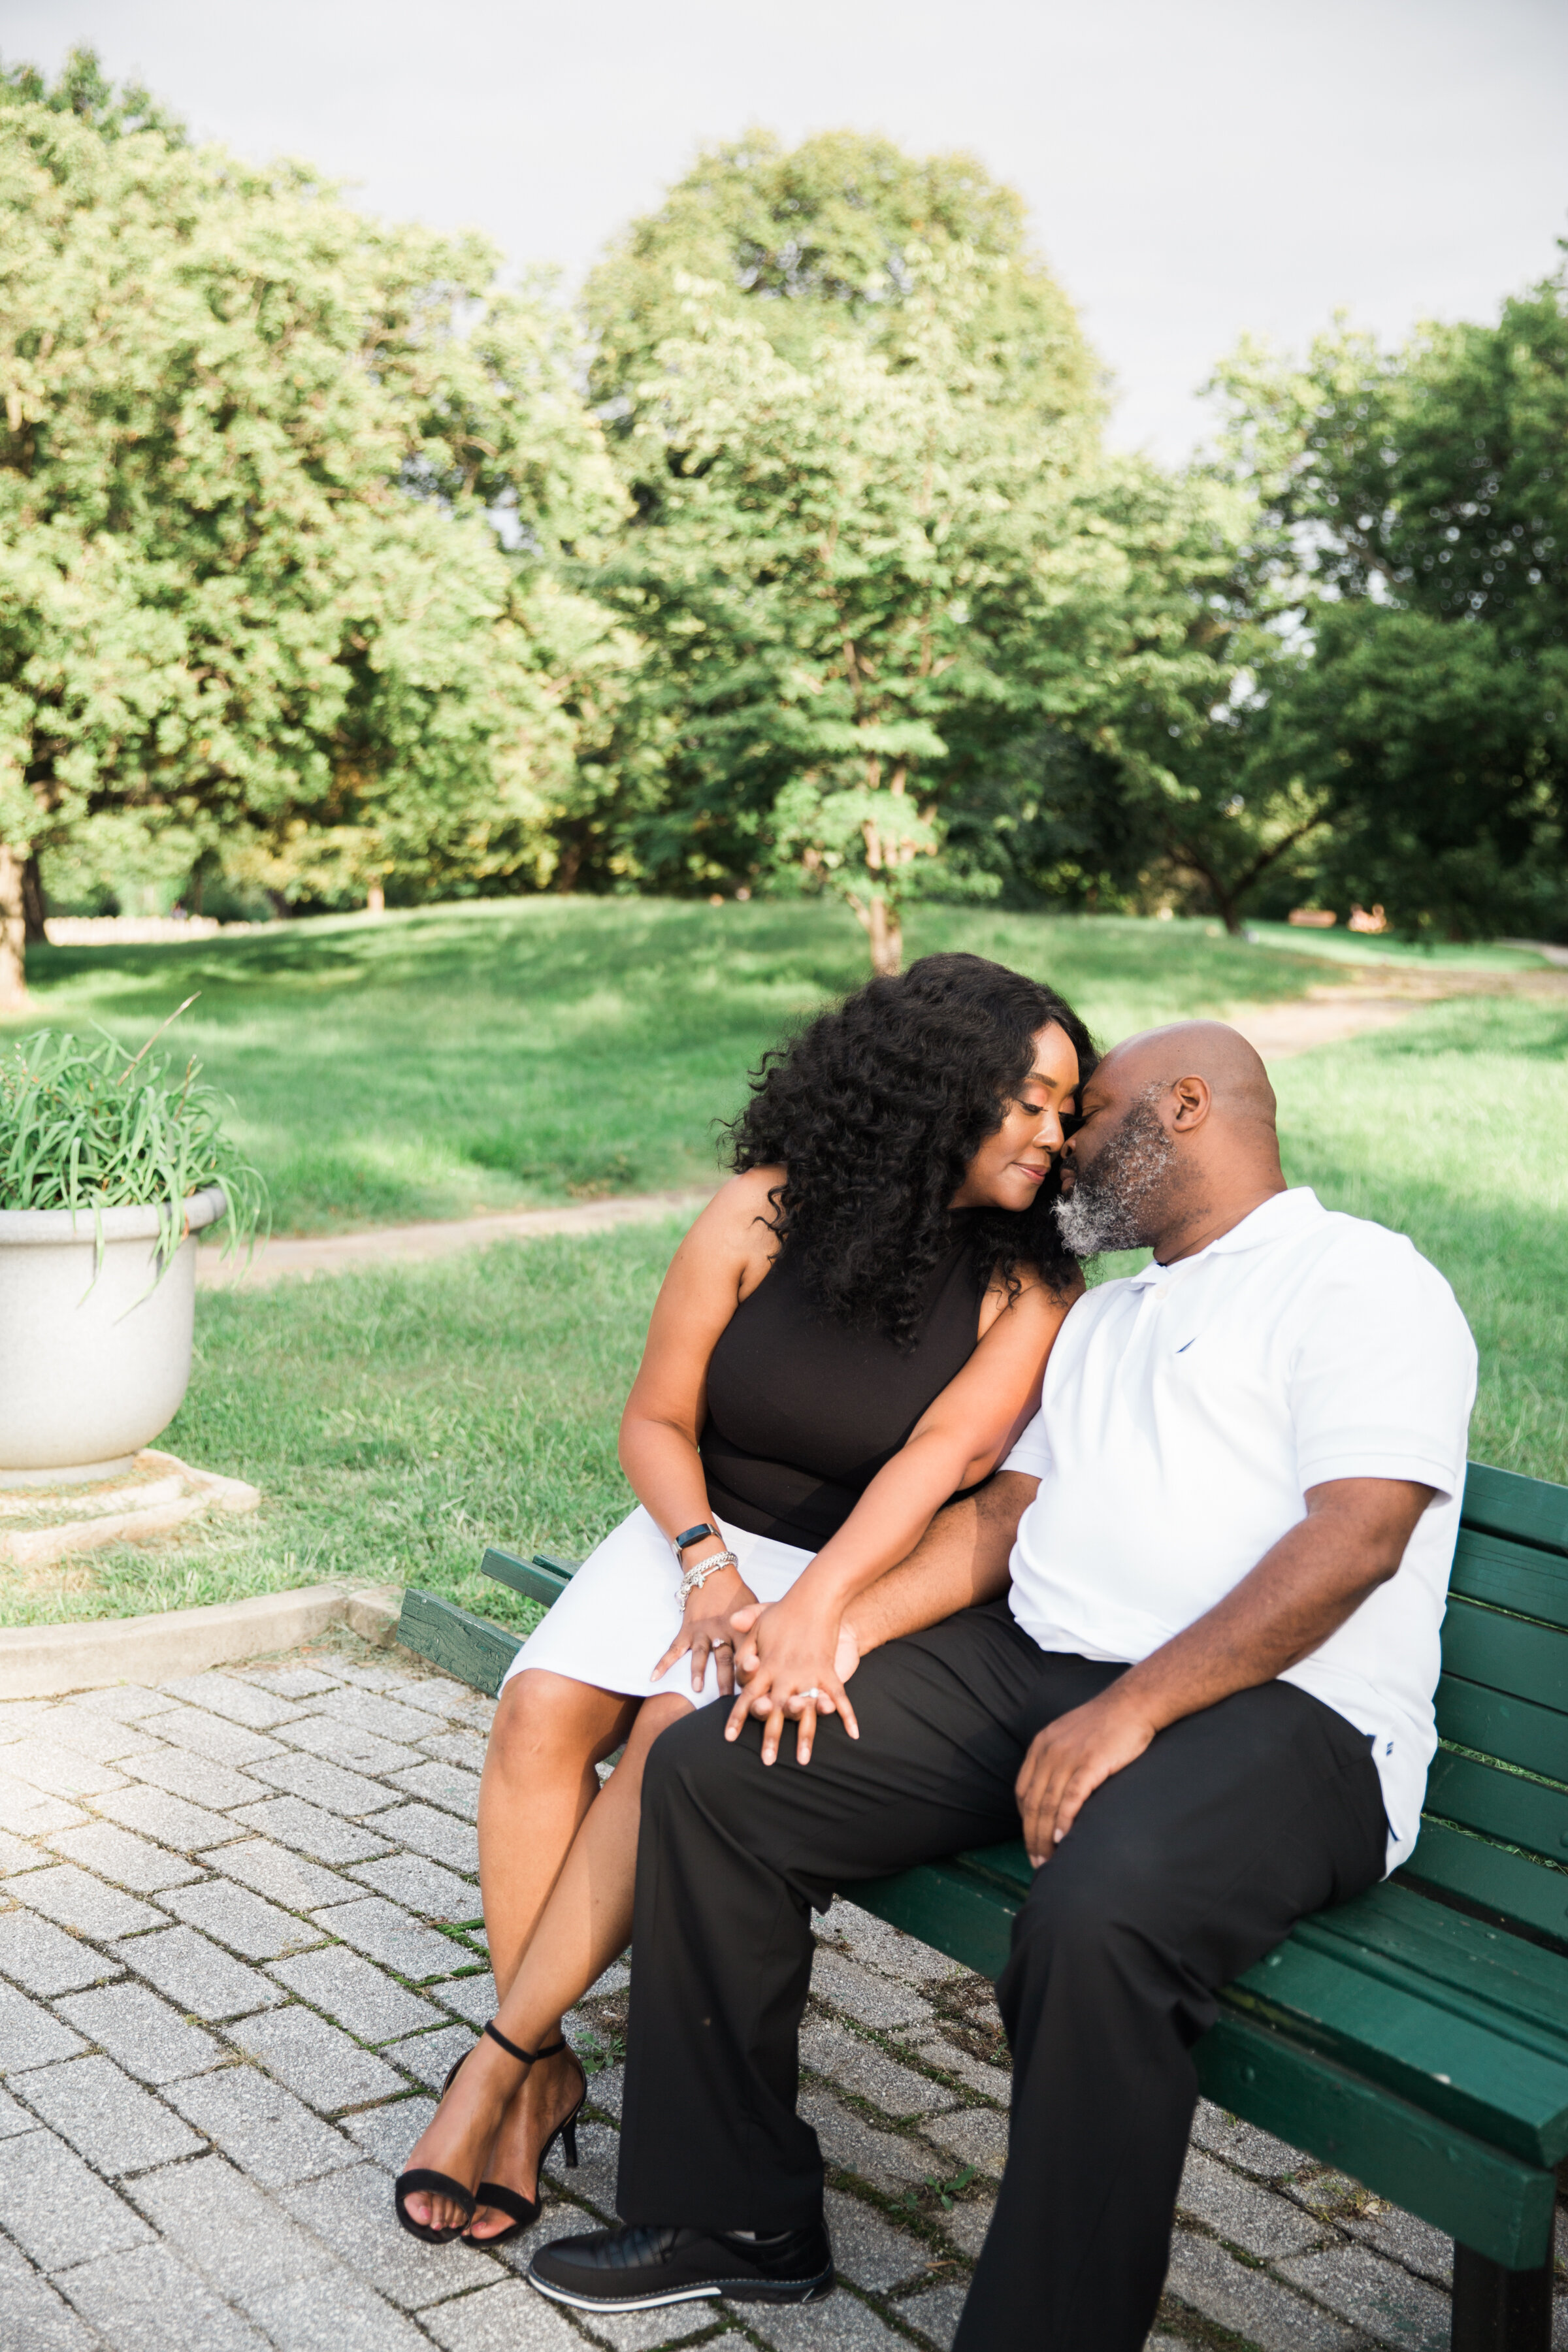 Patterson Park Engagement Session with Black Photographers Megapixels media in Baltimore Maryland (22 of 32).jpg